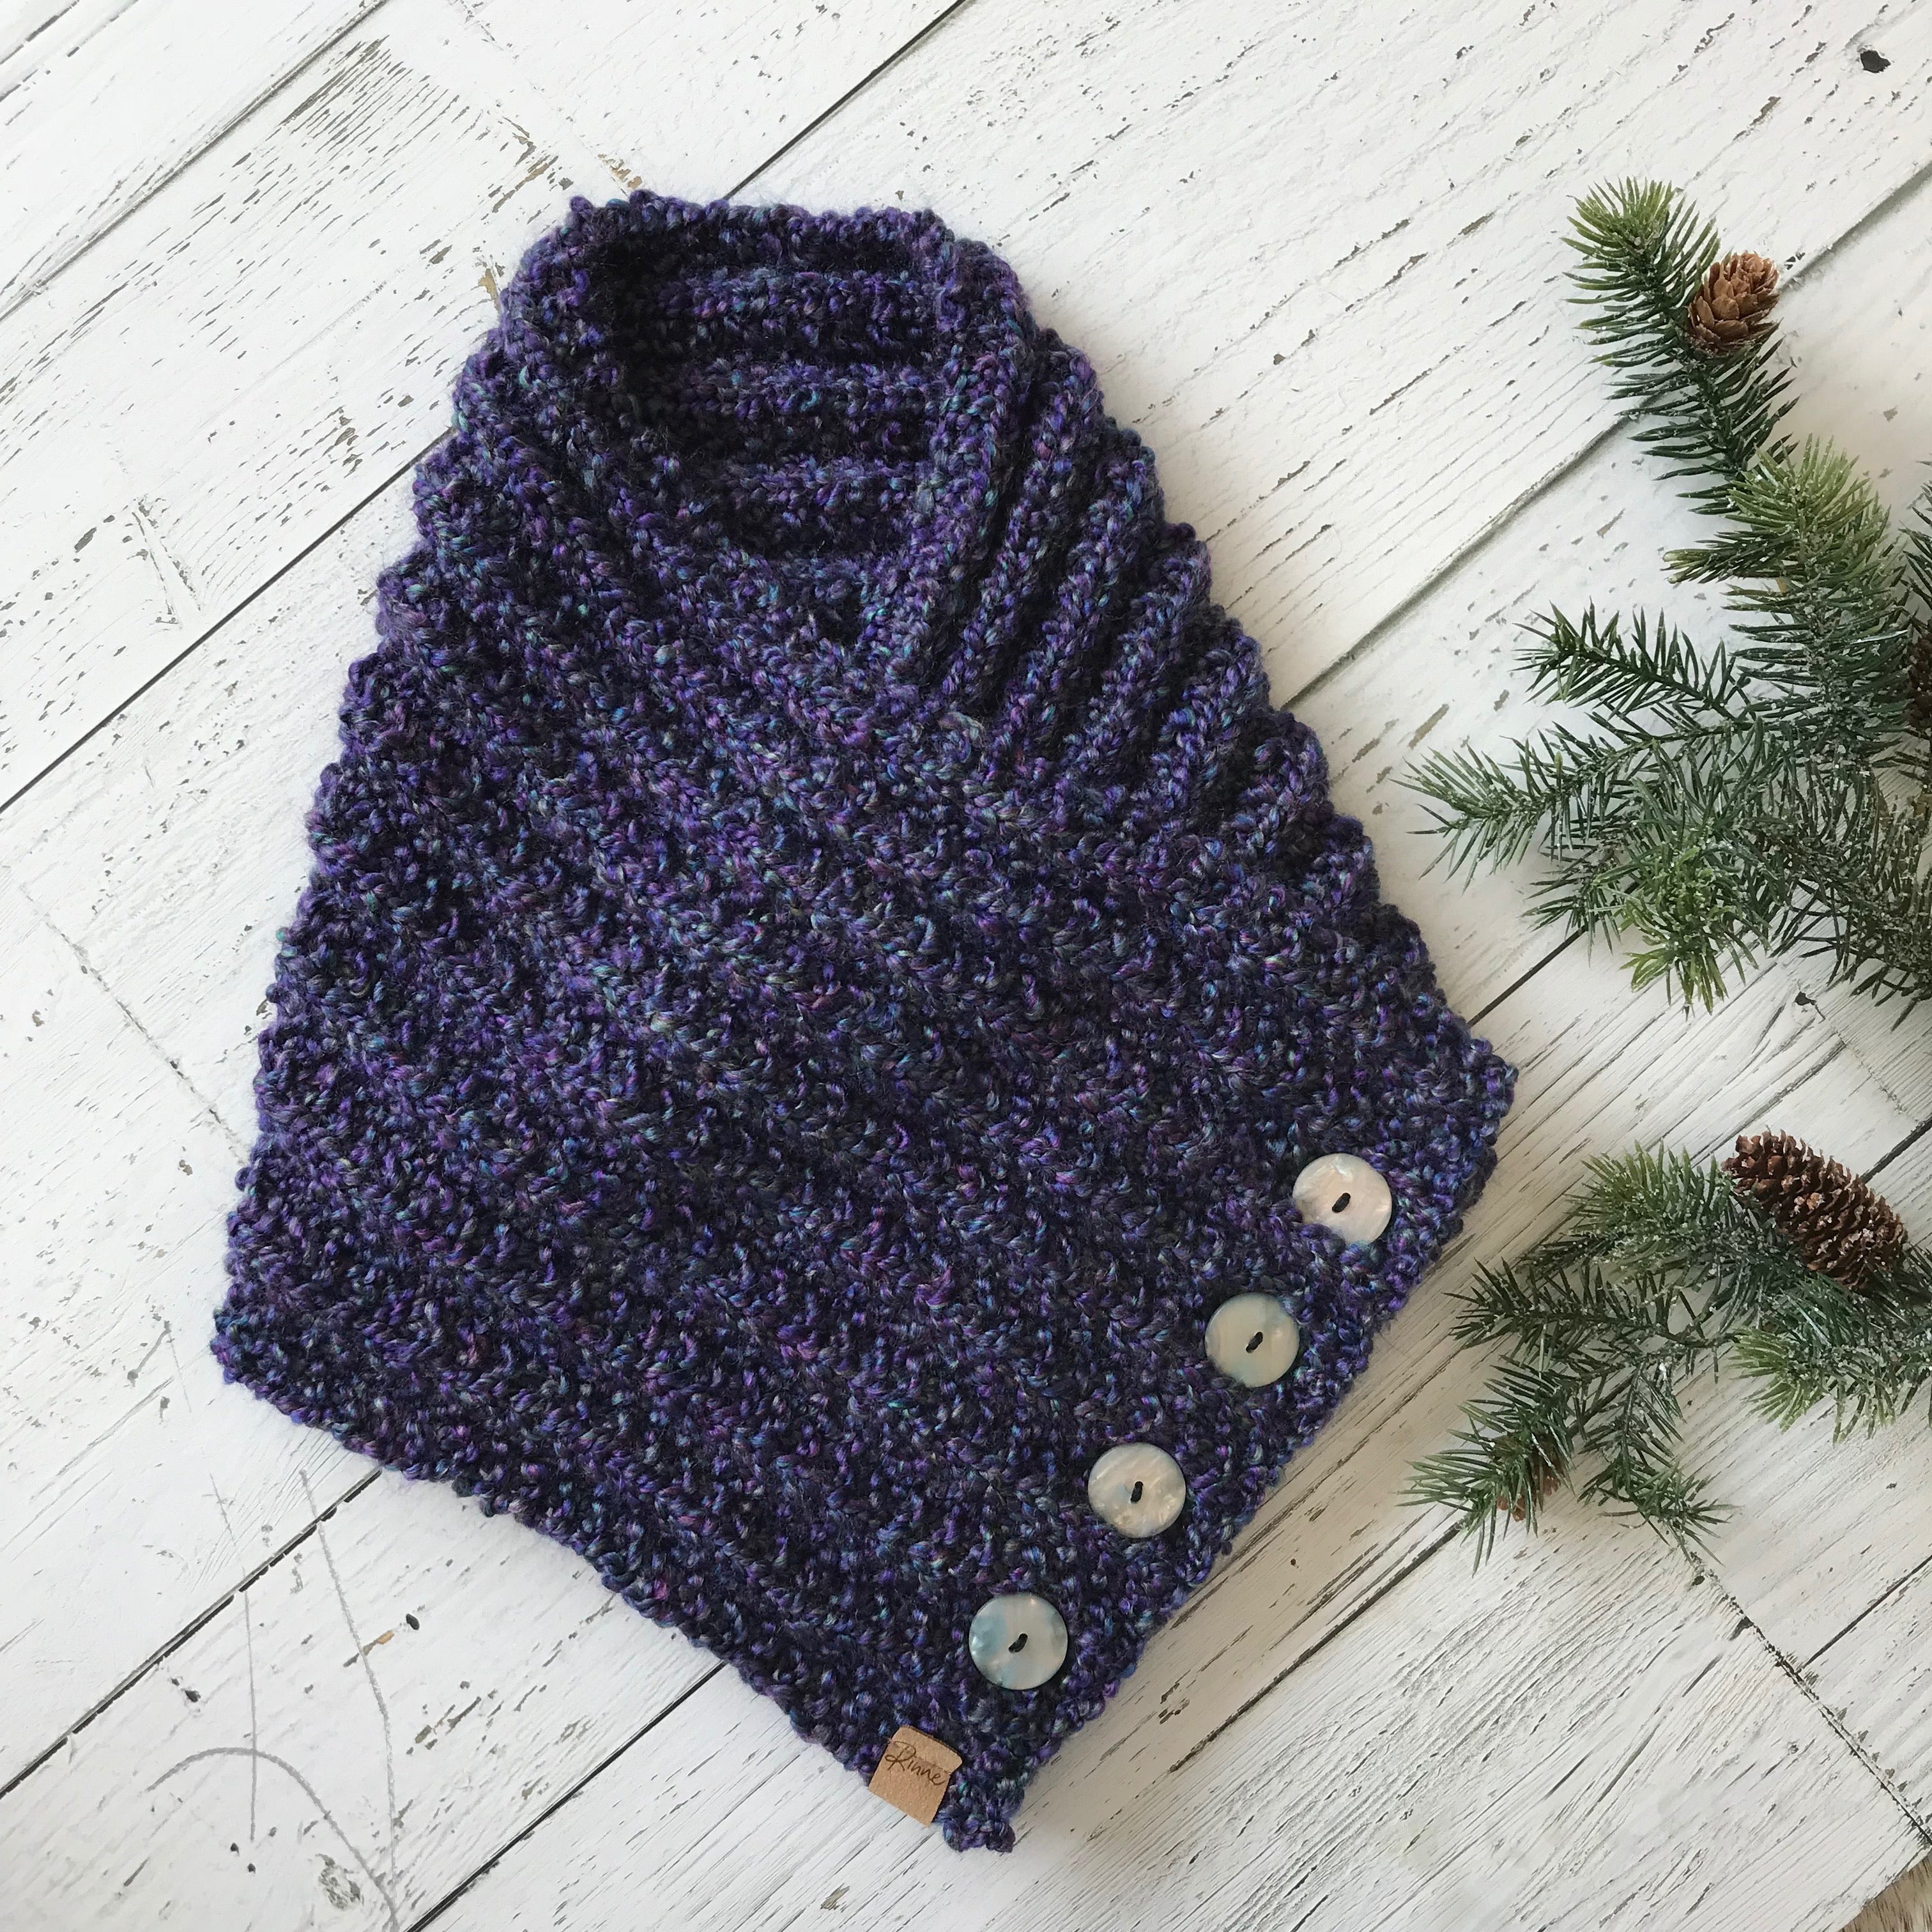 Classic Knit Button Cowl in heathered blue and purple, with shell buttons